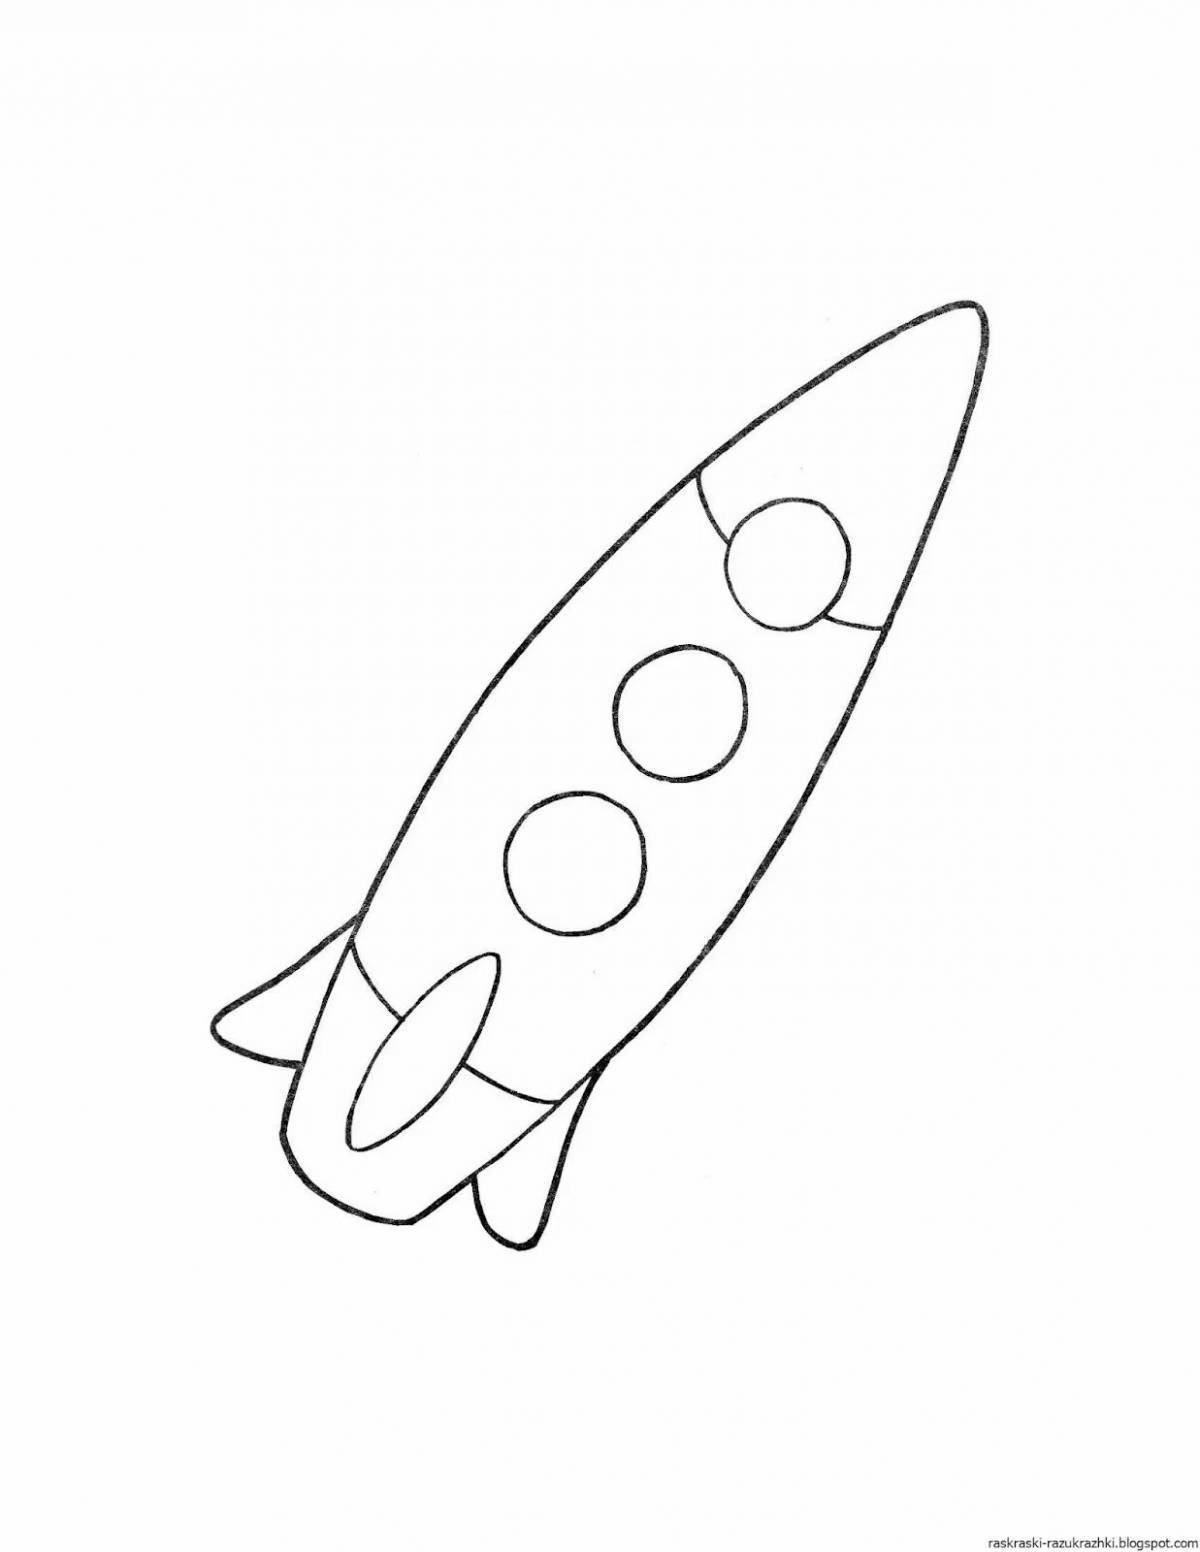 Fantastic rocket coloring book for 3-4 year olds